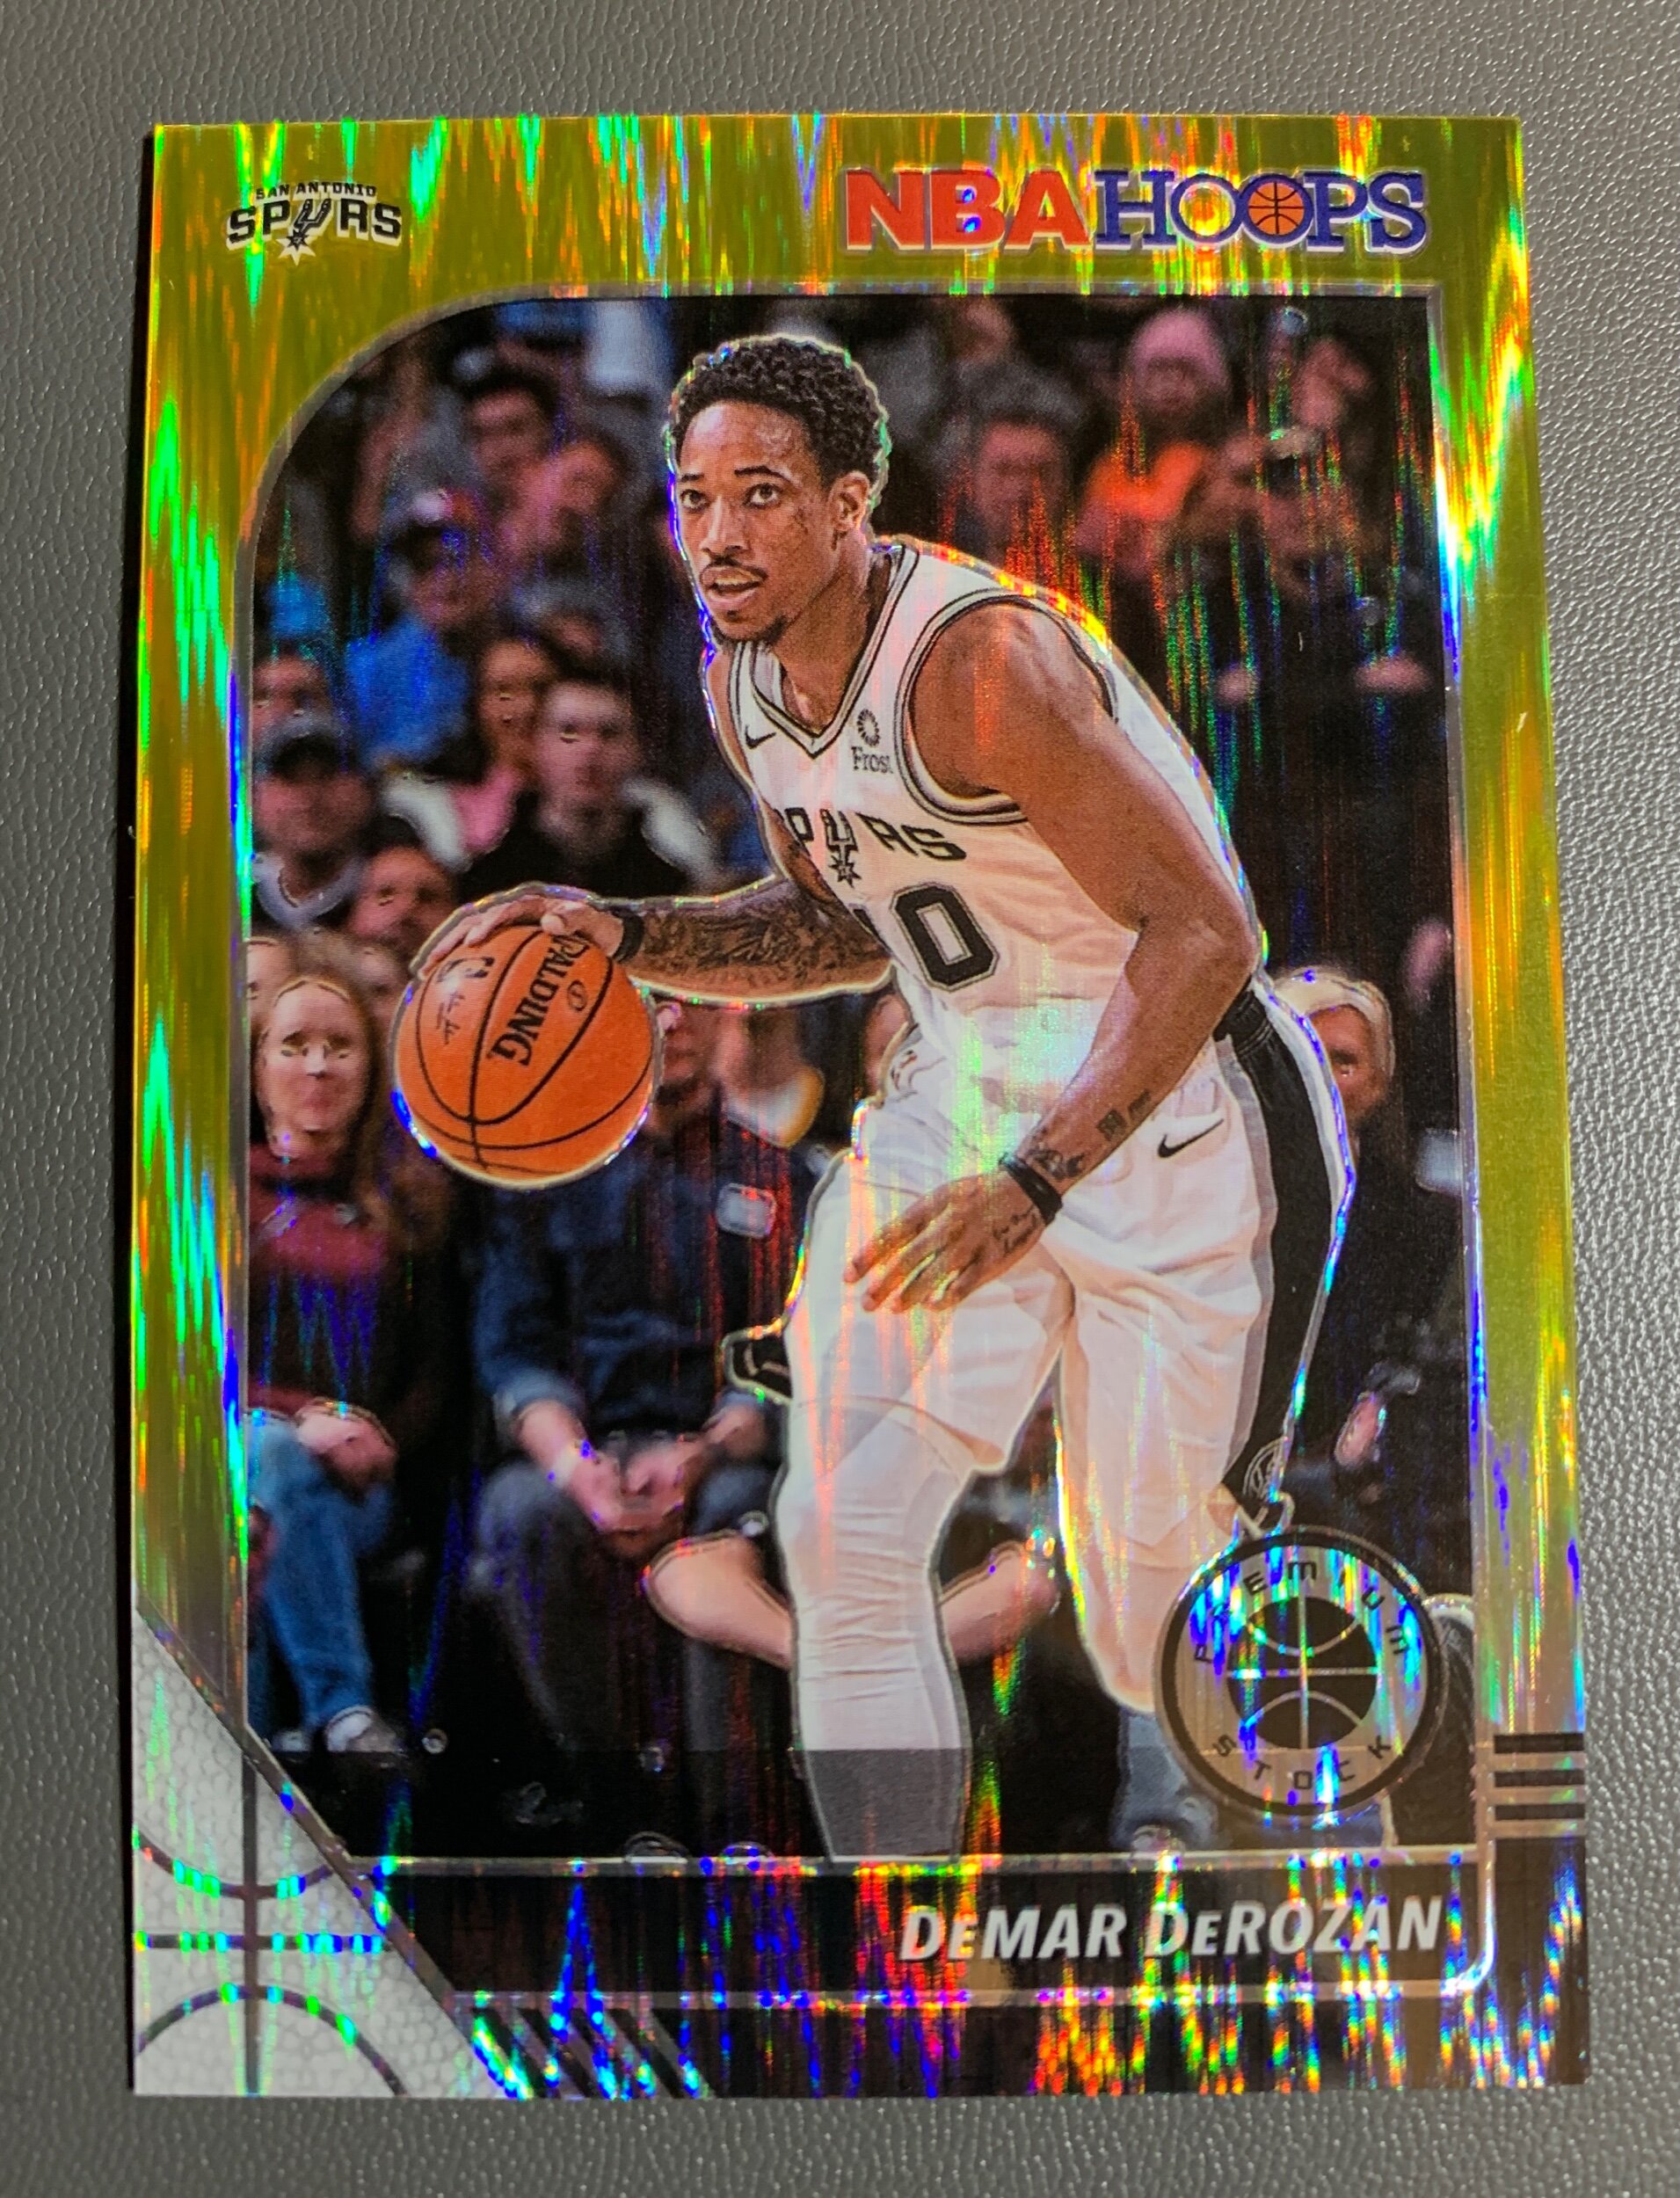 Here’s a Gold Flash DeRozan. Dude lives at the free throw line. Surprised they caught a photo of him somewhere else on the court.